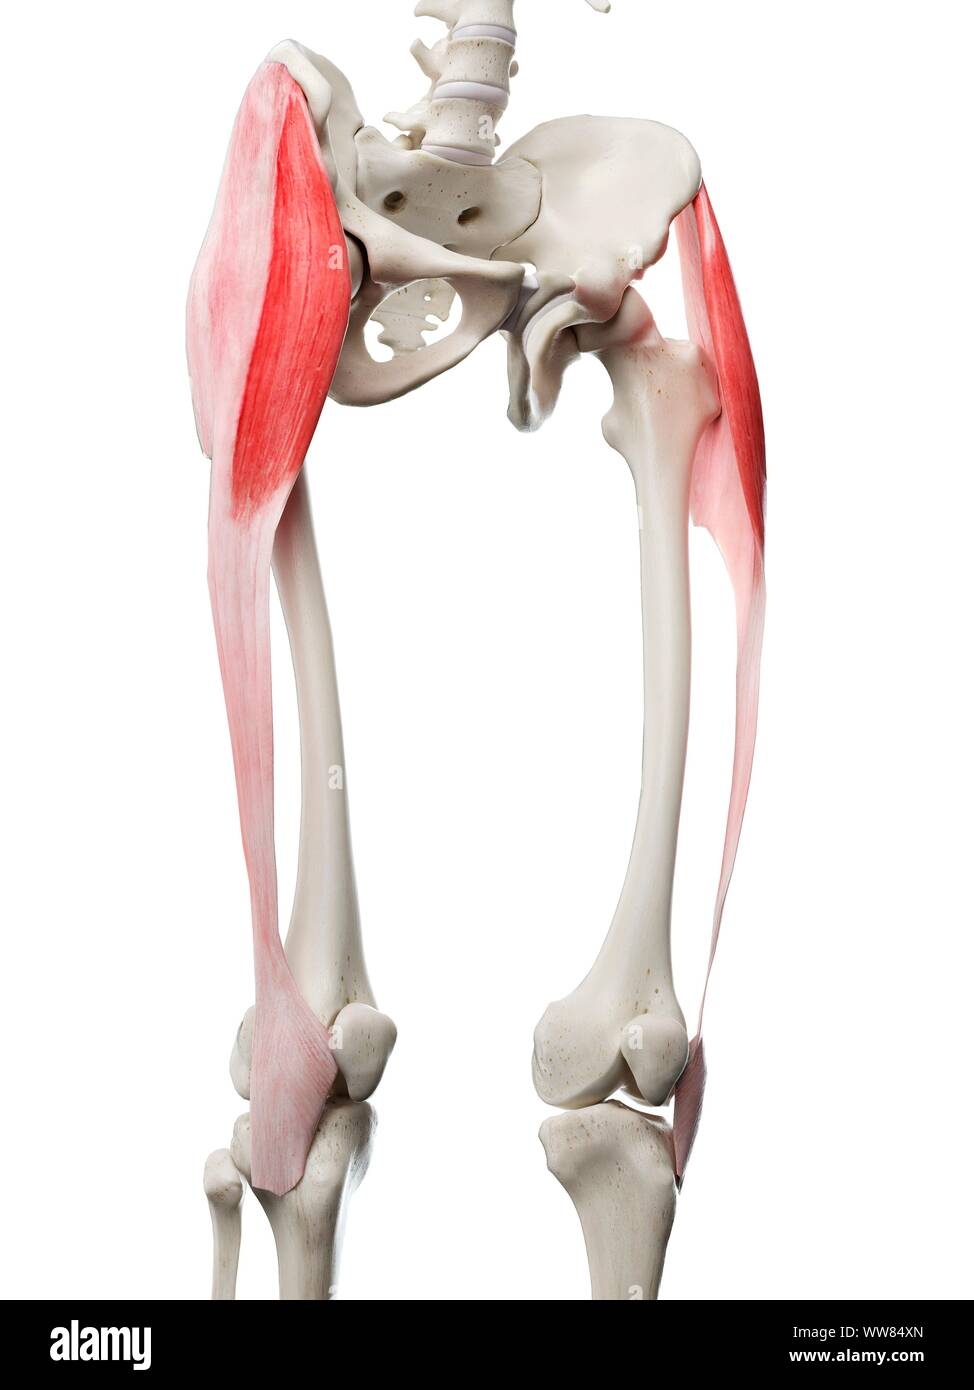 2,846 Tensor Fasciae Latae Images, Stock Photos, 3D objects